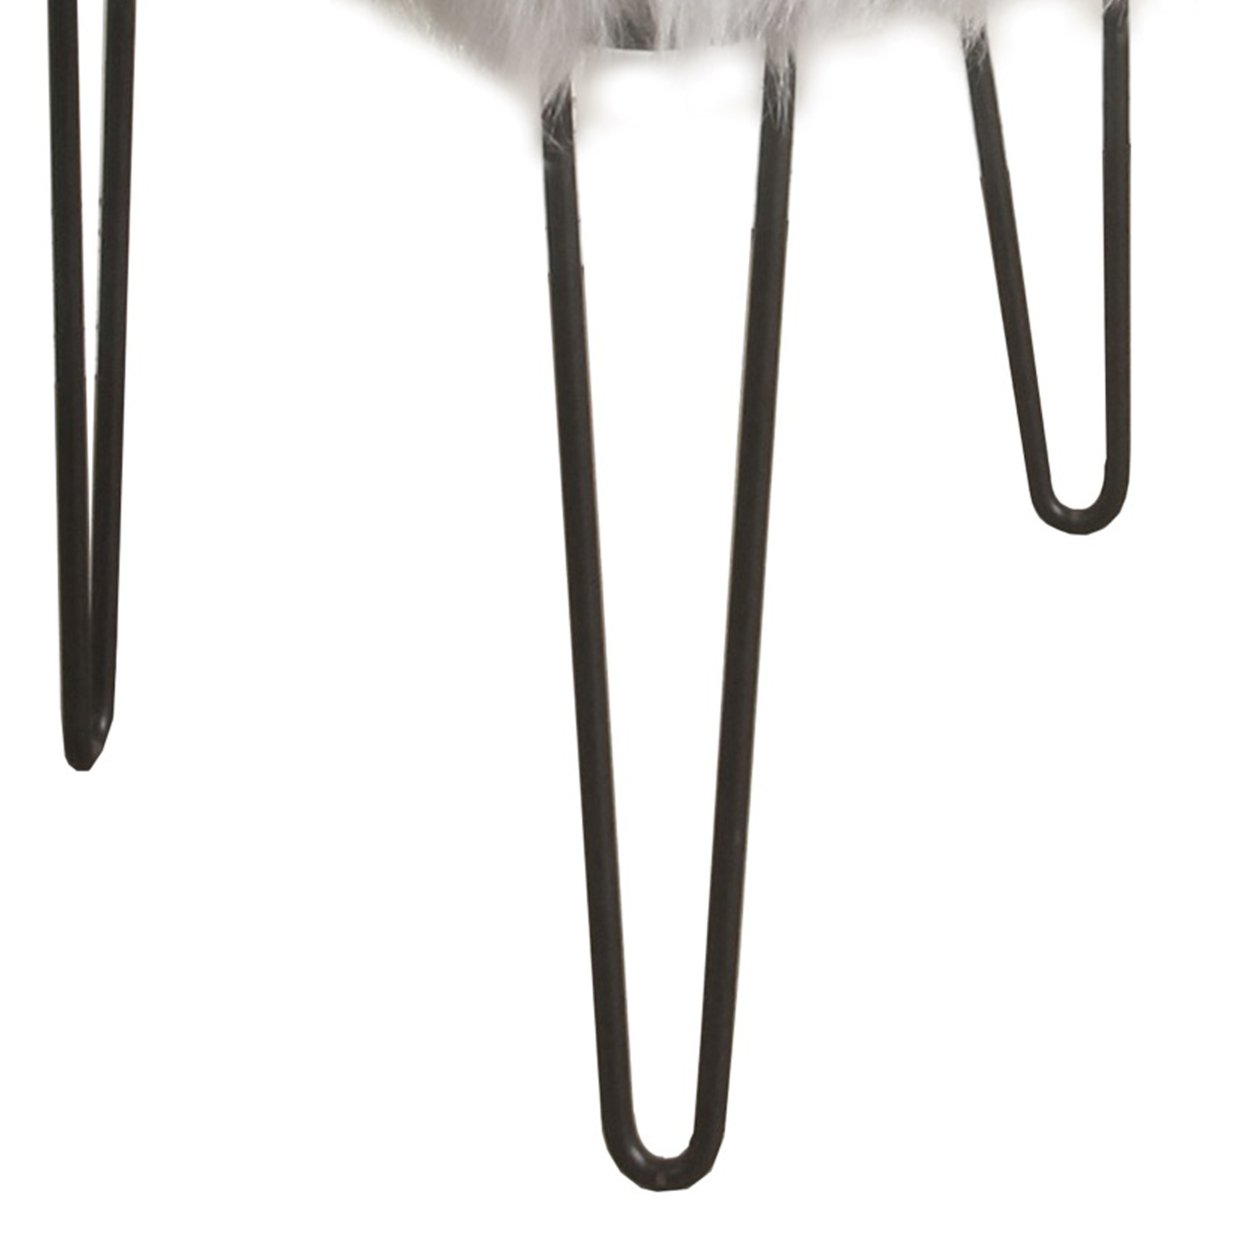 Metal Framed Stool With Faux Fur Upholstered Seat And Hairpin Legs, Gray And Black- Saltoro Sherpi